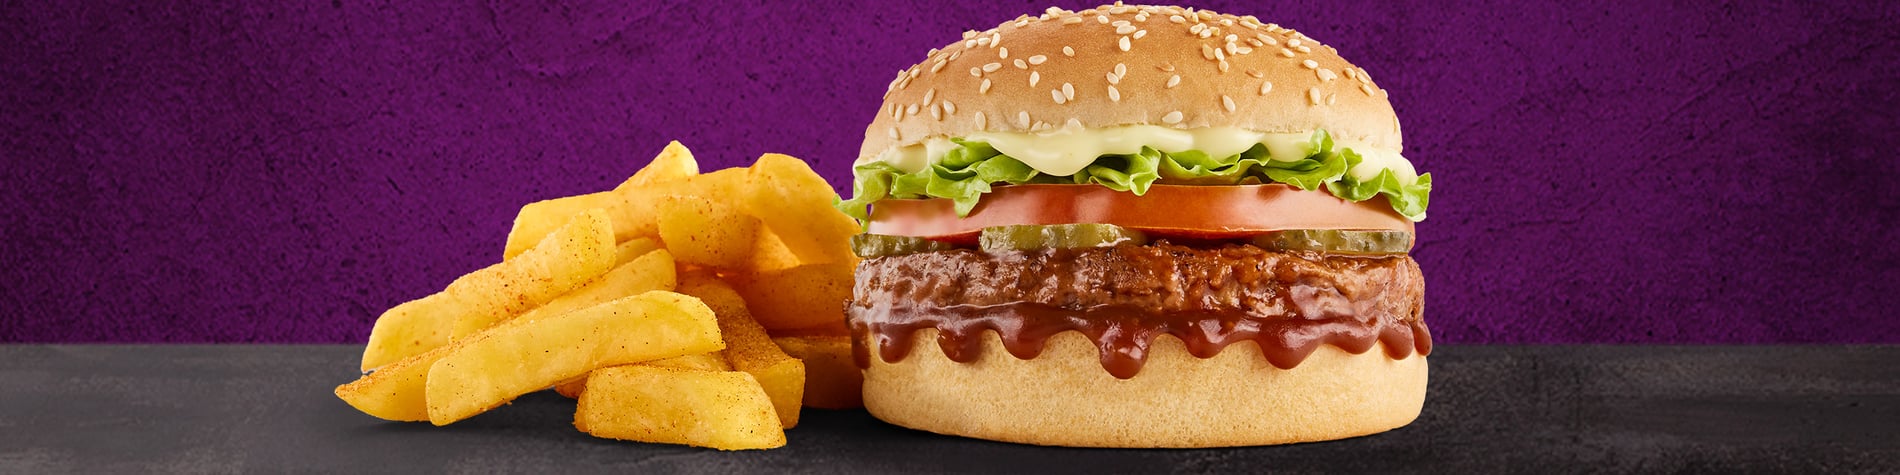 The NEW Mo’MjojoTM Burger Meal from Steers® Bracken City Brackenhurst. 2 Flame-Grilled pure beef patties, pineapple, macon, tomato, lettuce, and small Famous Hand-Cut Chips, on a purple background.